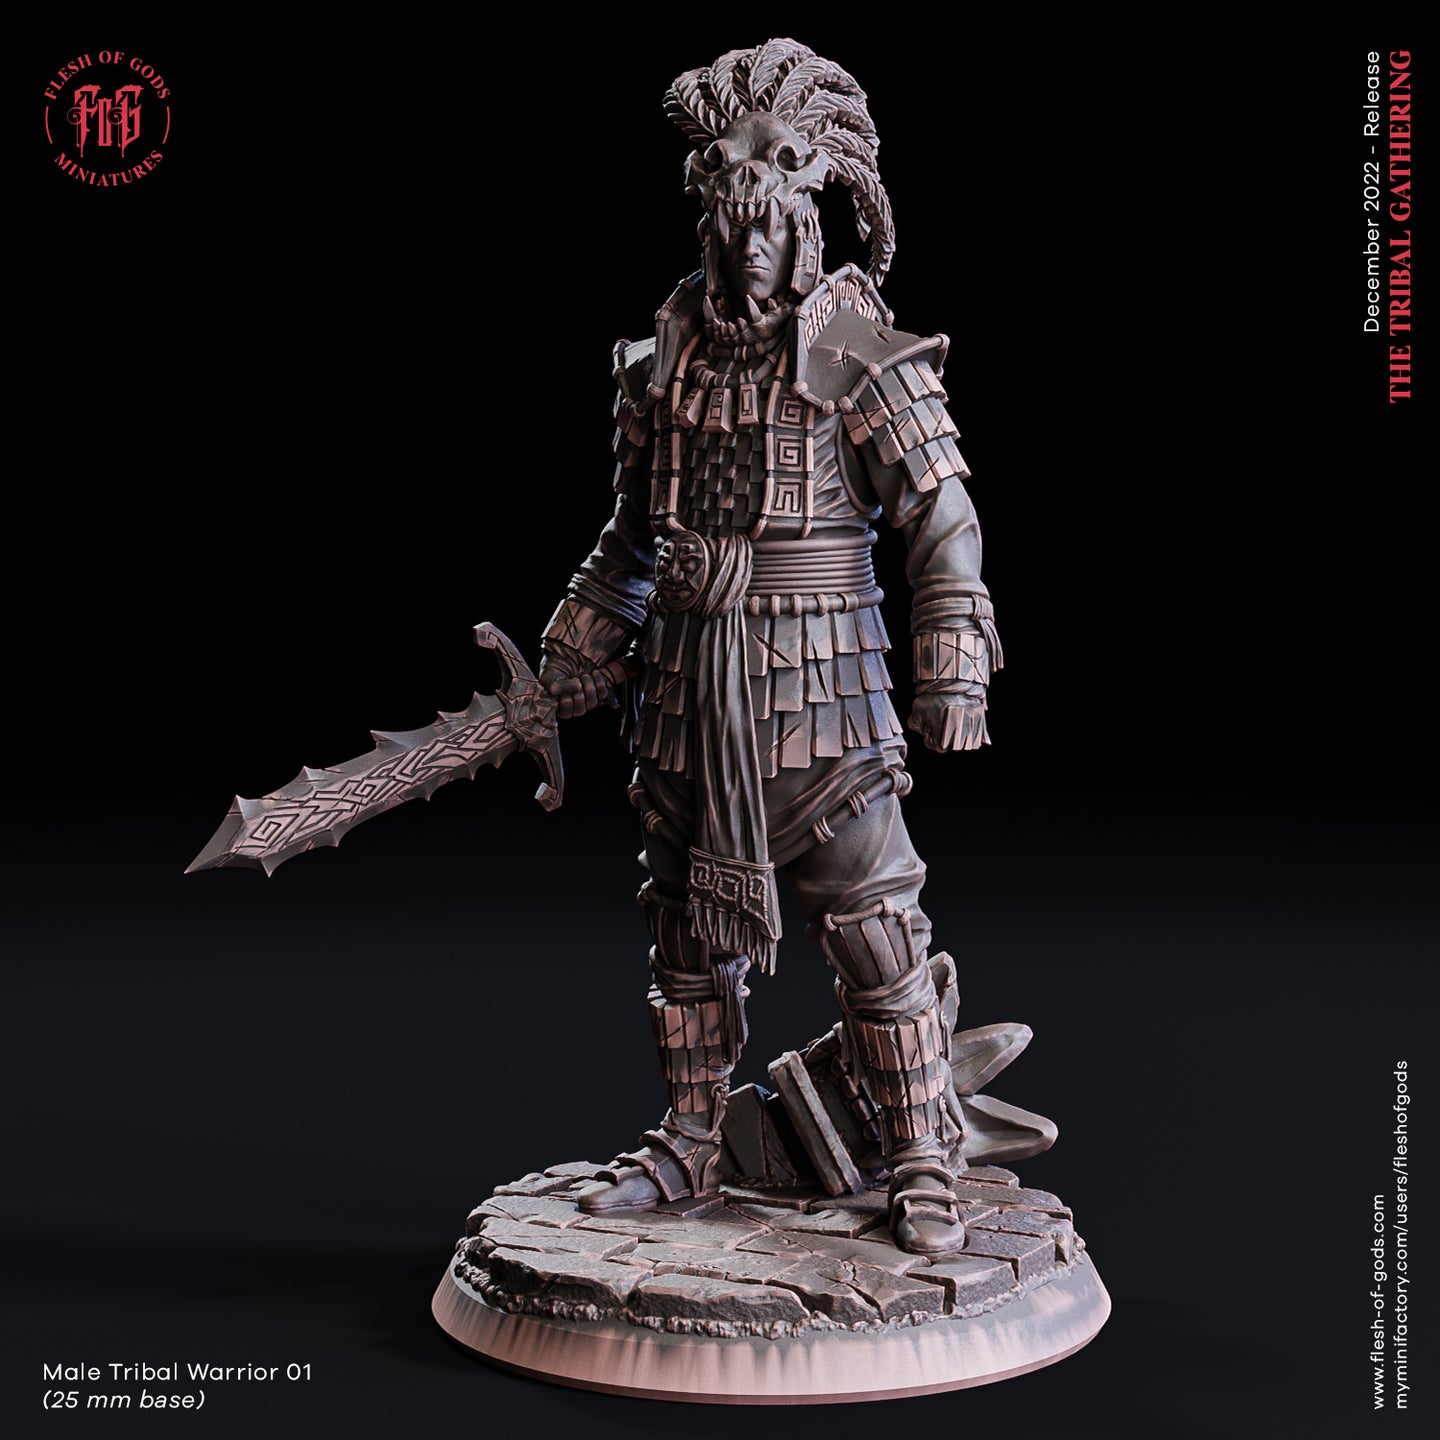 Male Tribal Warrior 1 - The Tribal Gathering - Flesh of Gods - Wargaming D&D DnD